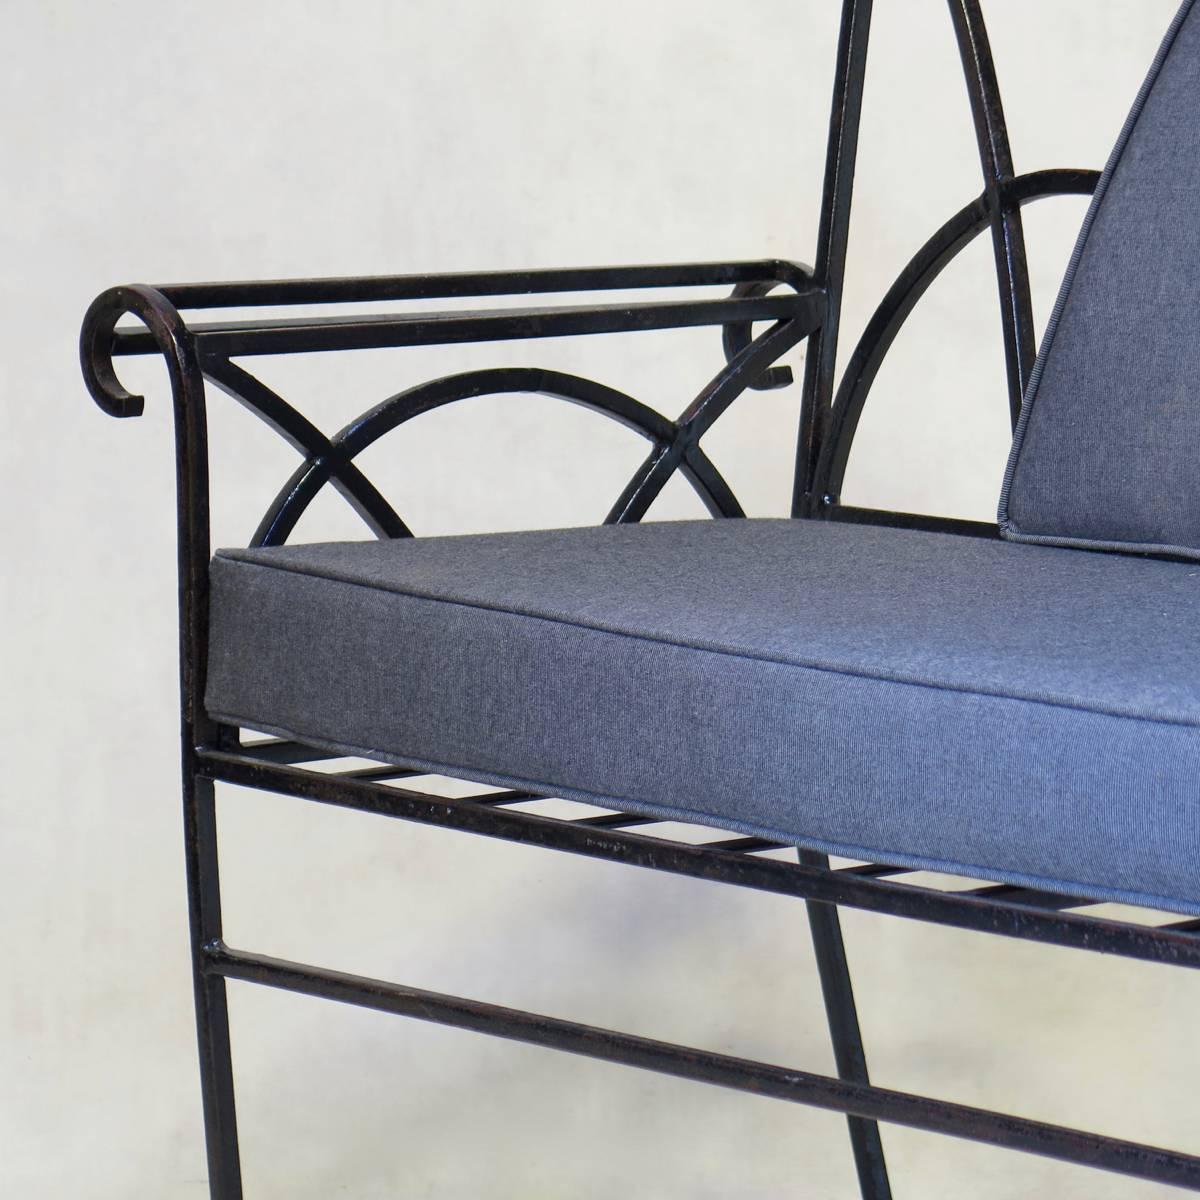 20th Century French Wrought Iron Settee, circa 1940s For Sale